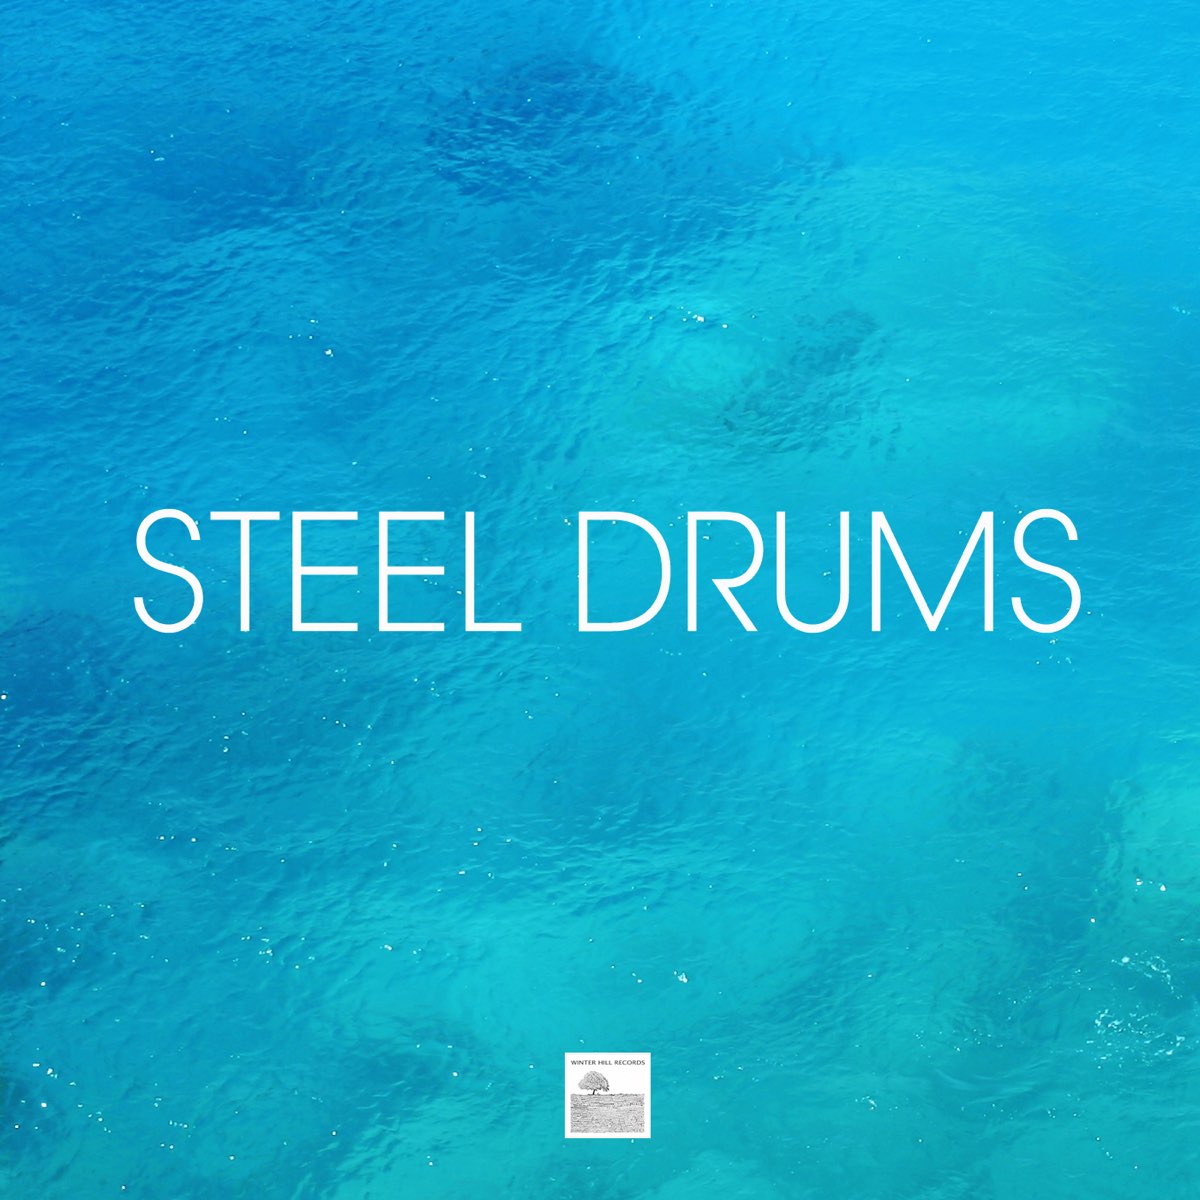 Steel - Caribbean Drum Steelpan and Caribbean Drums Dance Party by Steel Drums Music Crew on Apple Music